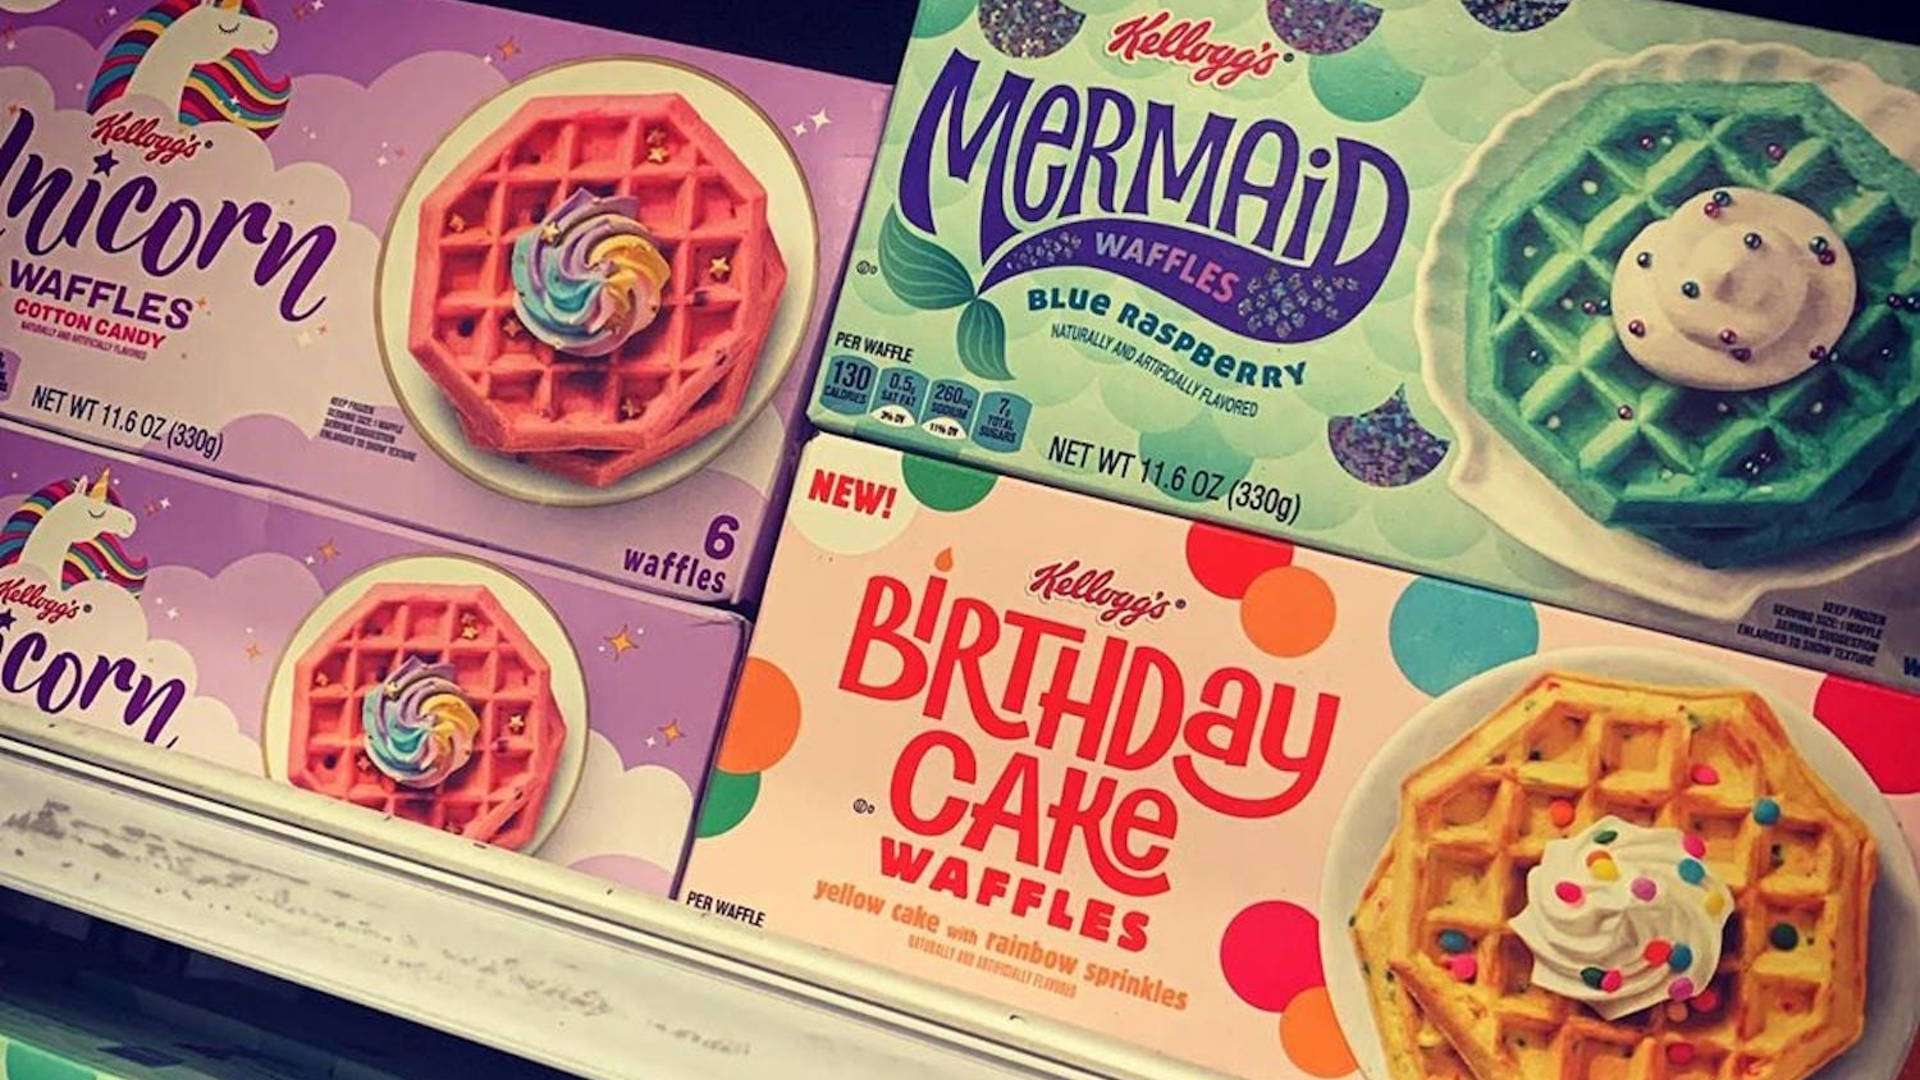 Unicorn and Mermaid Waffles That Taste Like Cotton Candy From Kellogg's